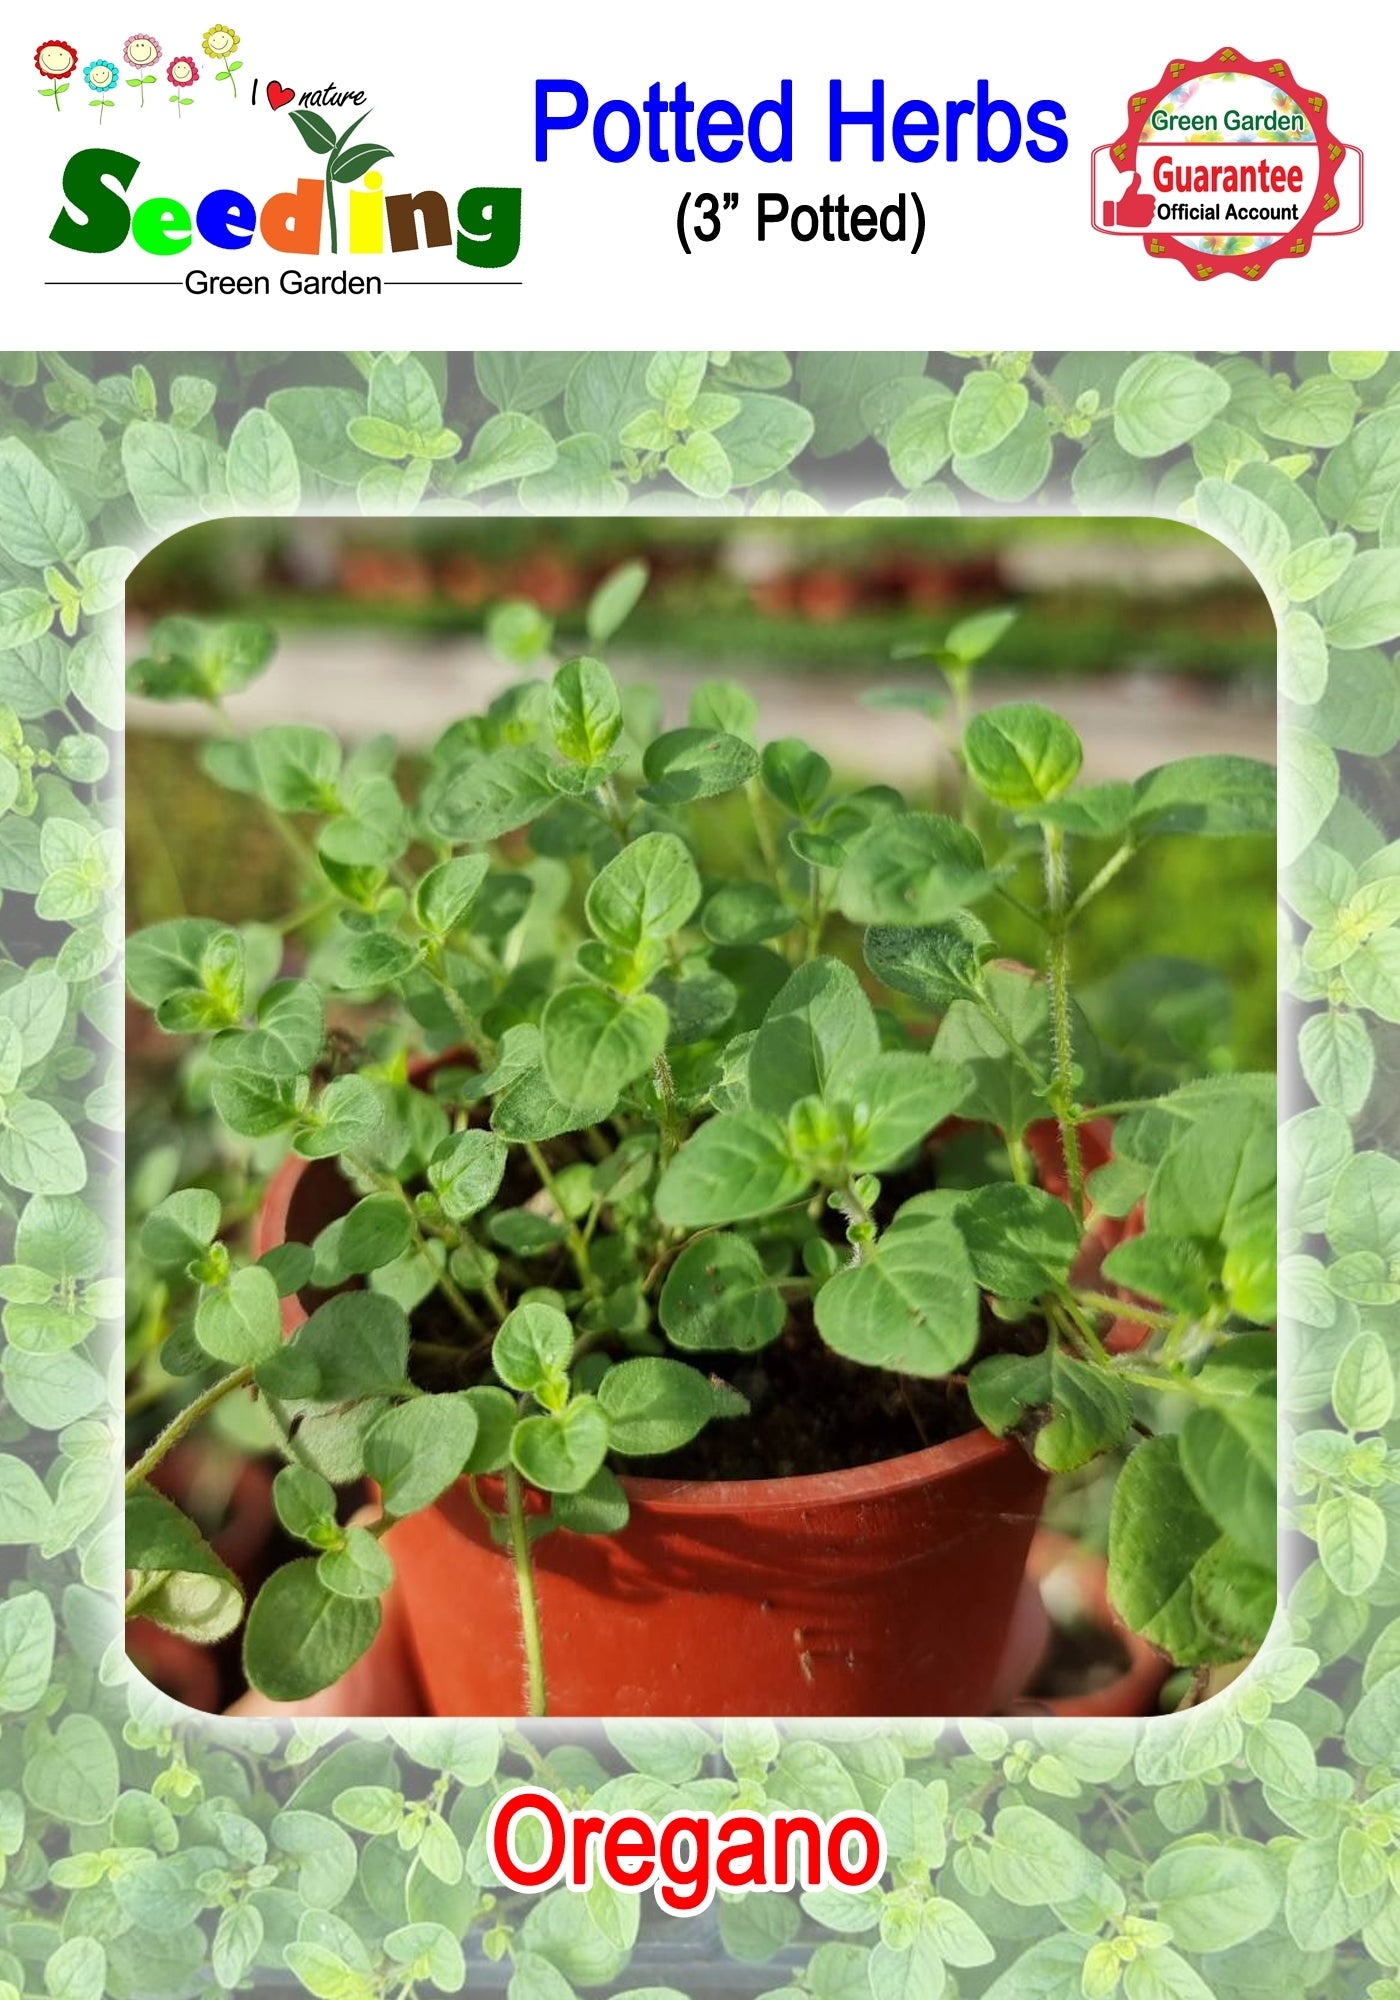 Buy 1 take 1 Assorted Potted Herbs in 3" Pot